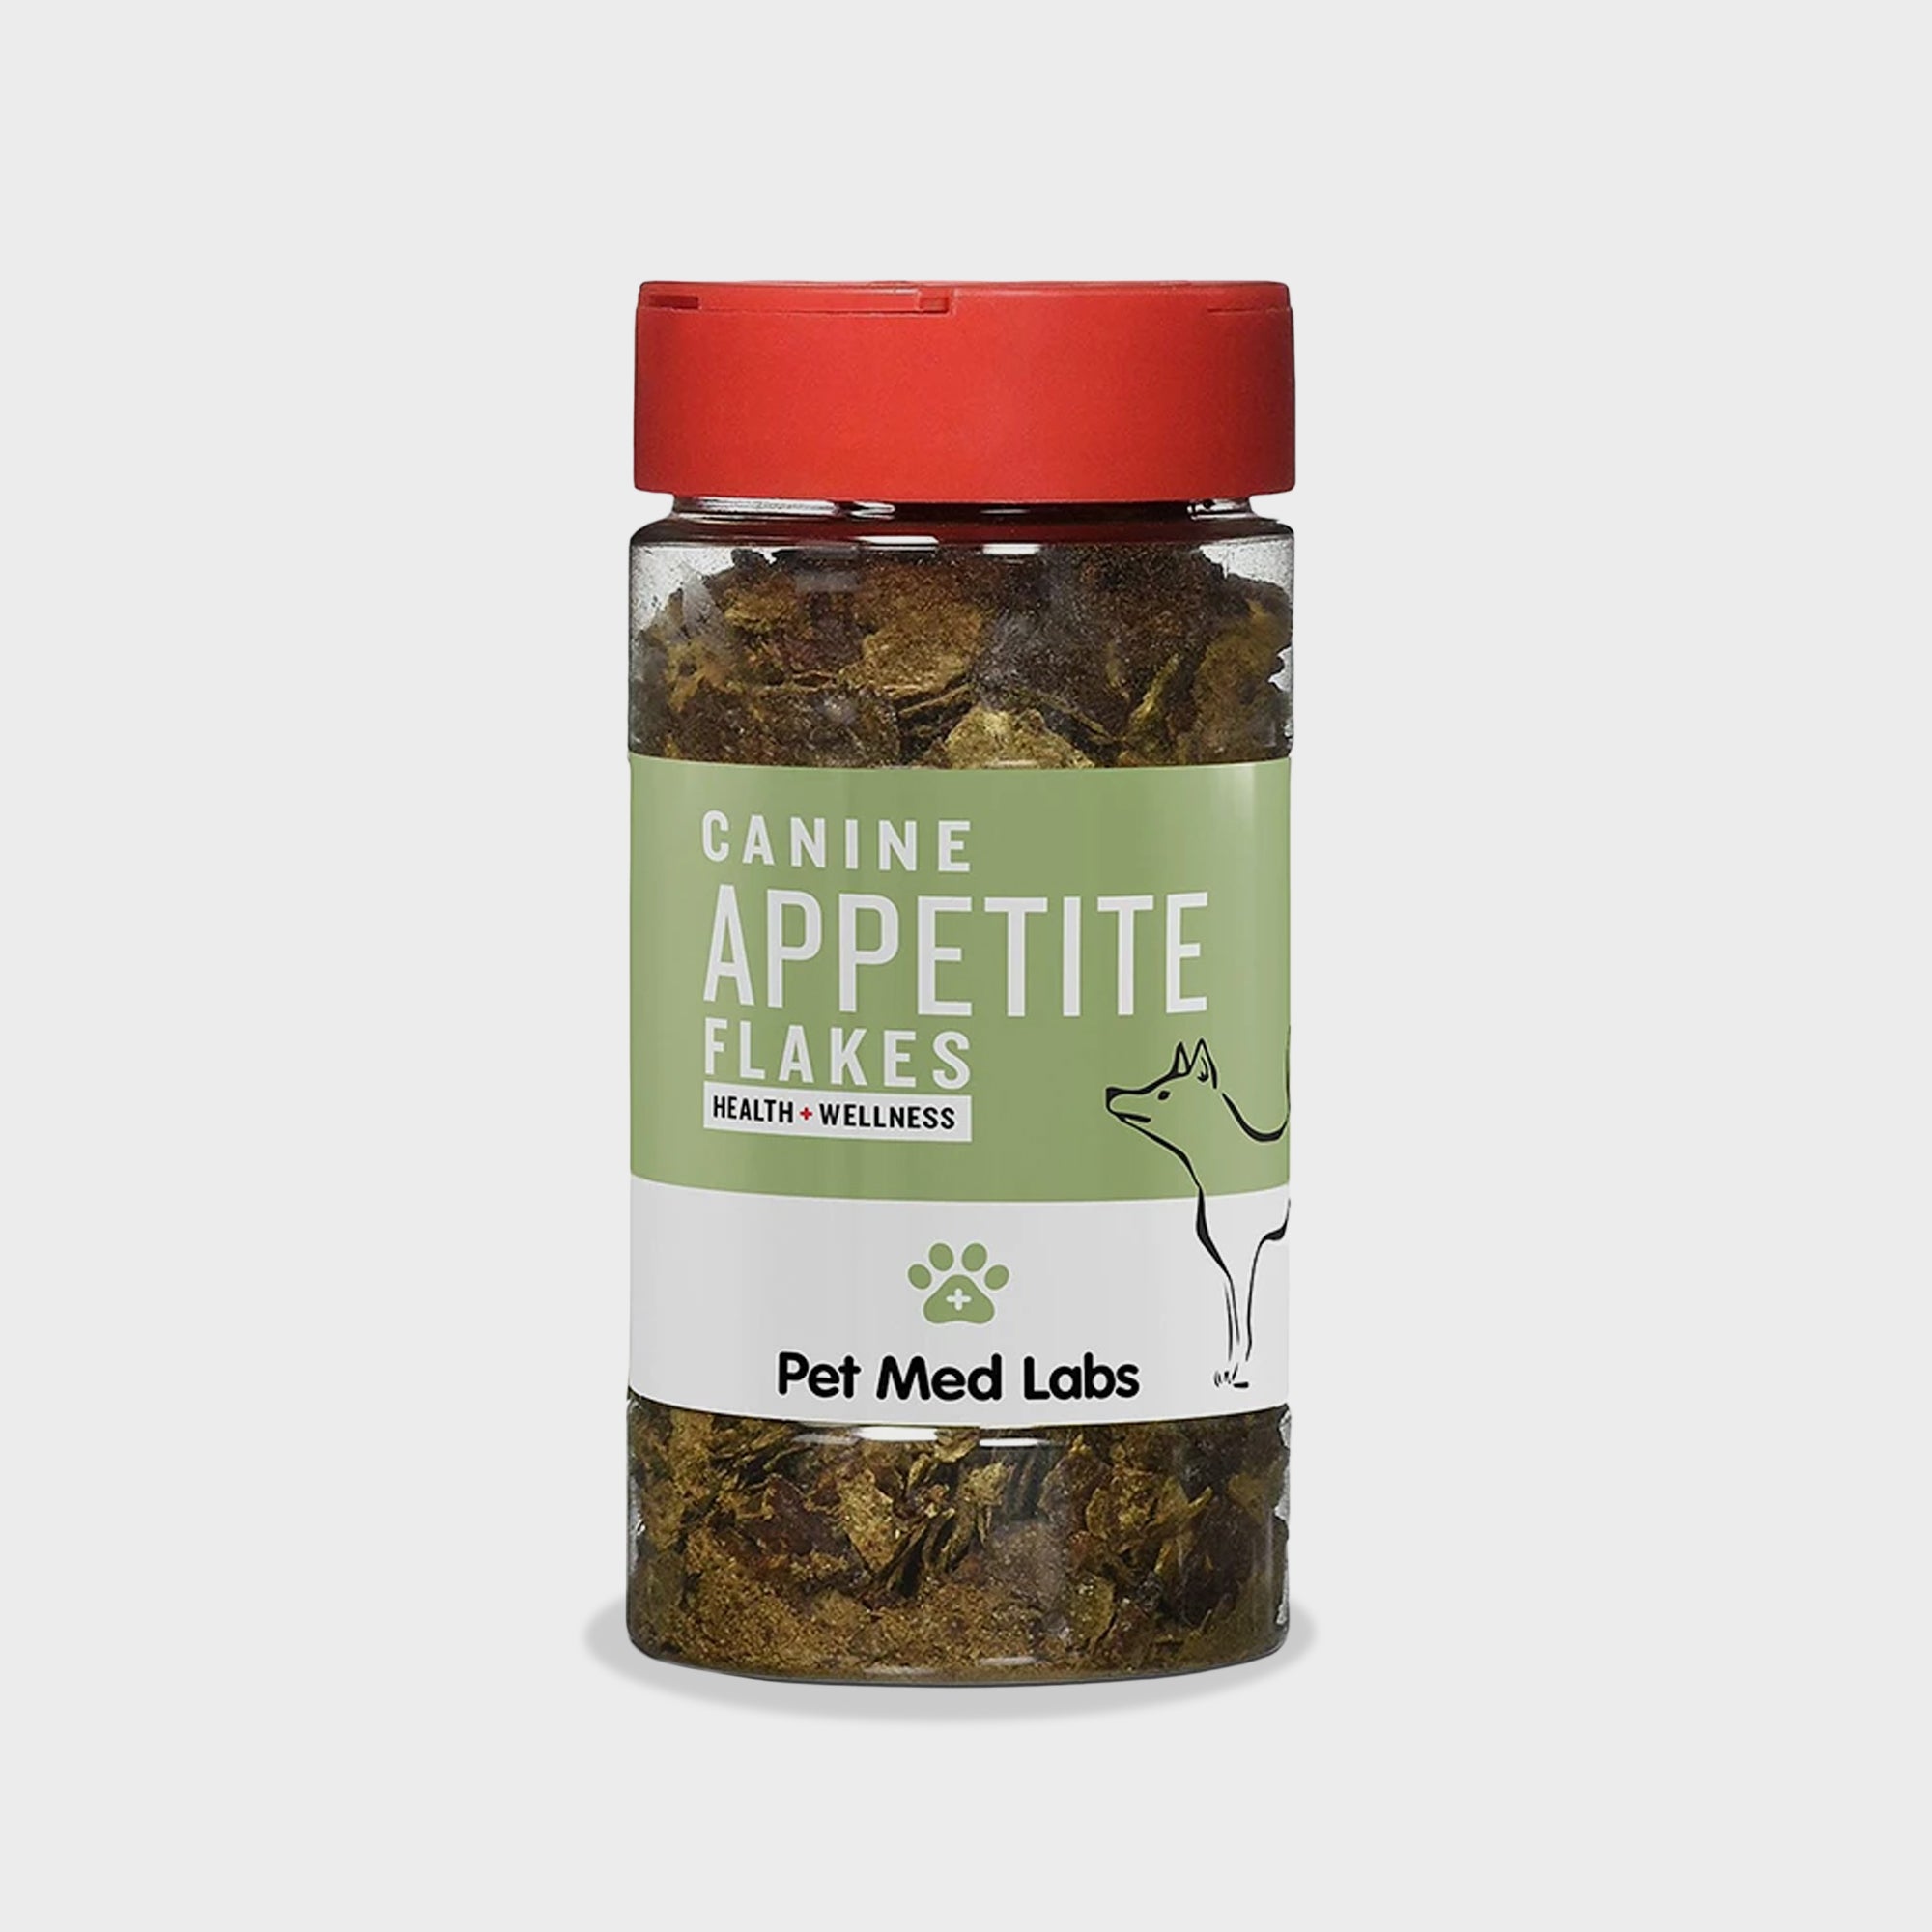 CANINE APPETITE FLAKES - Pet Med Labs